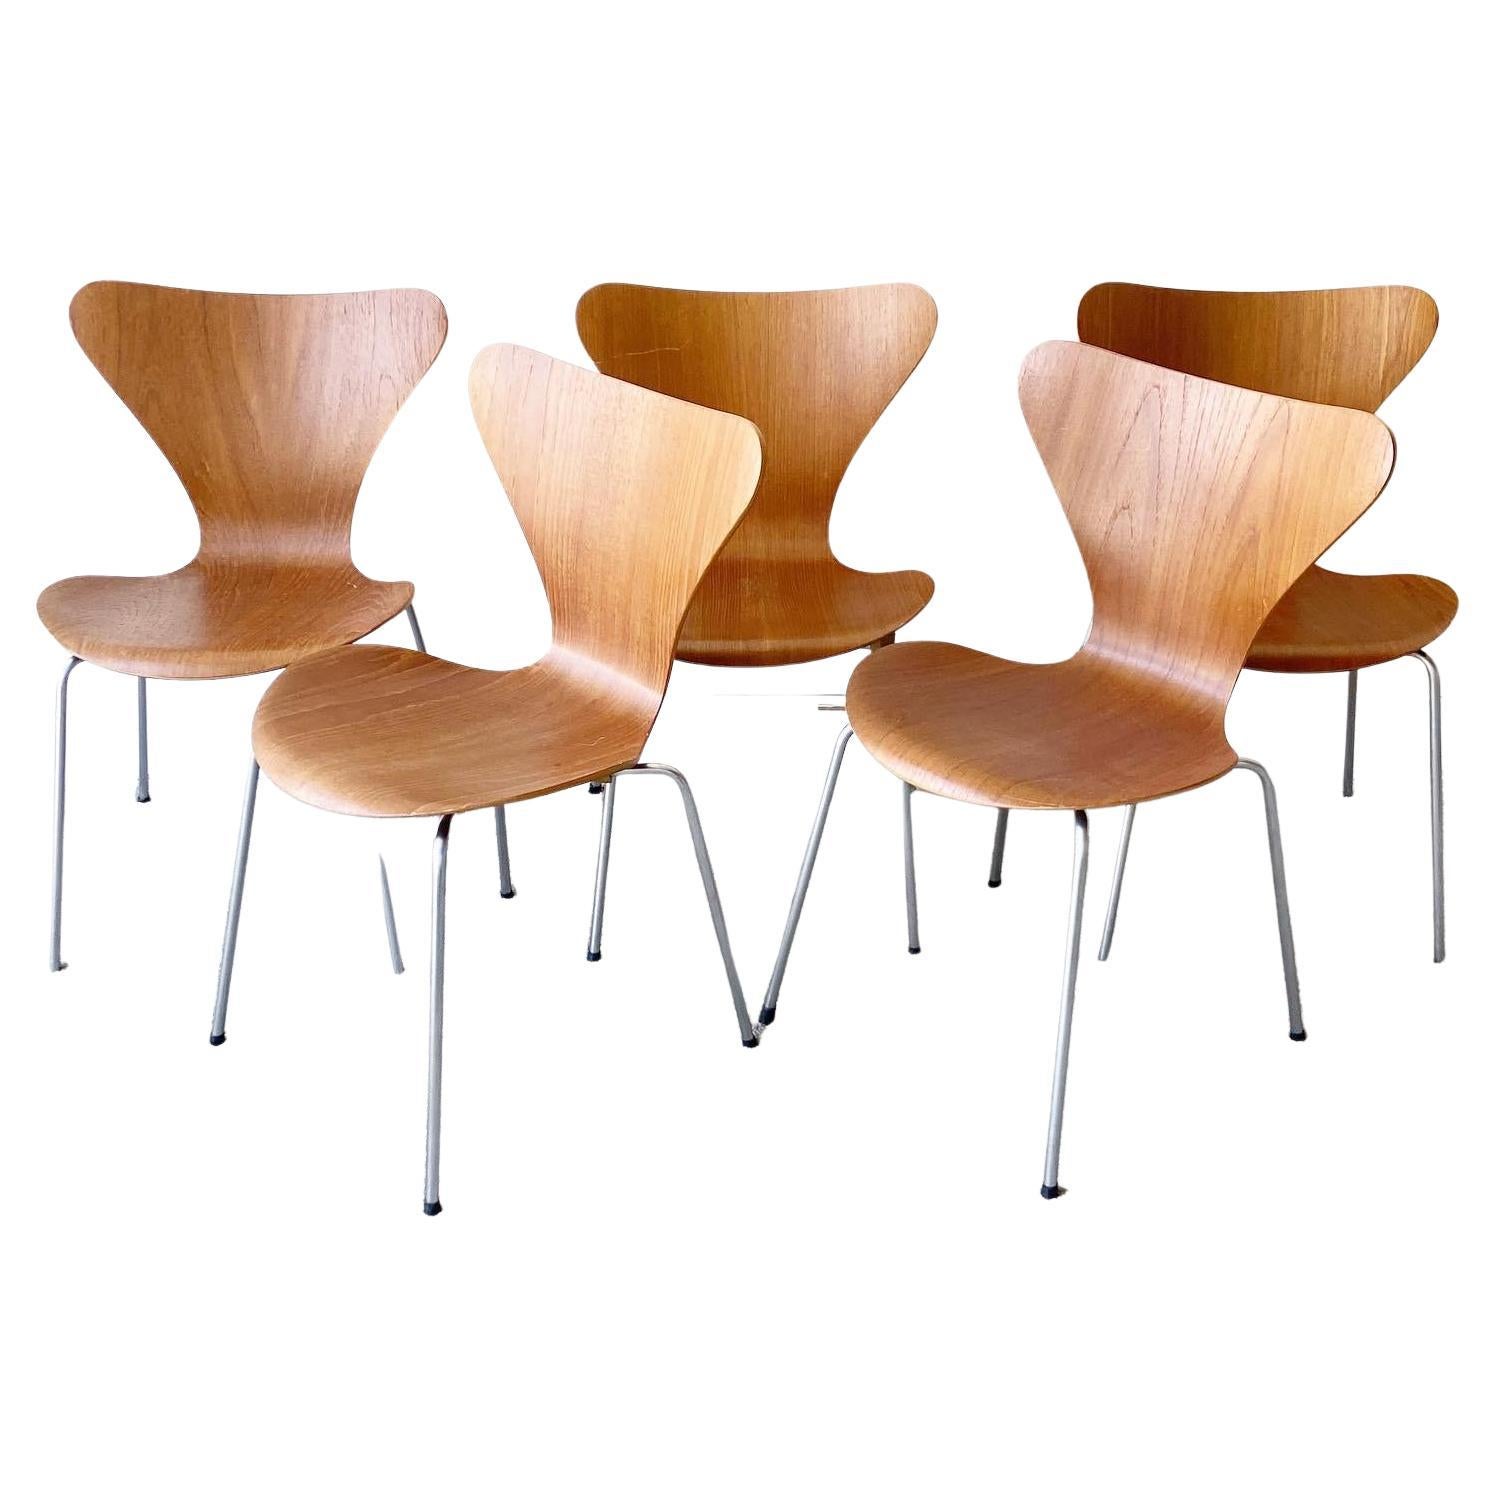 Eight Mid Century Modern Chairs by Arne Jacobsen, Manufactured by Fritz ...